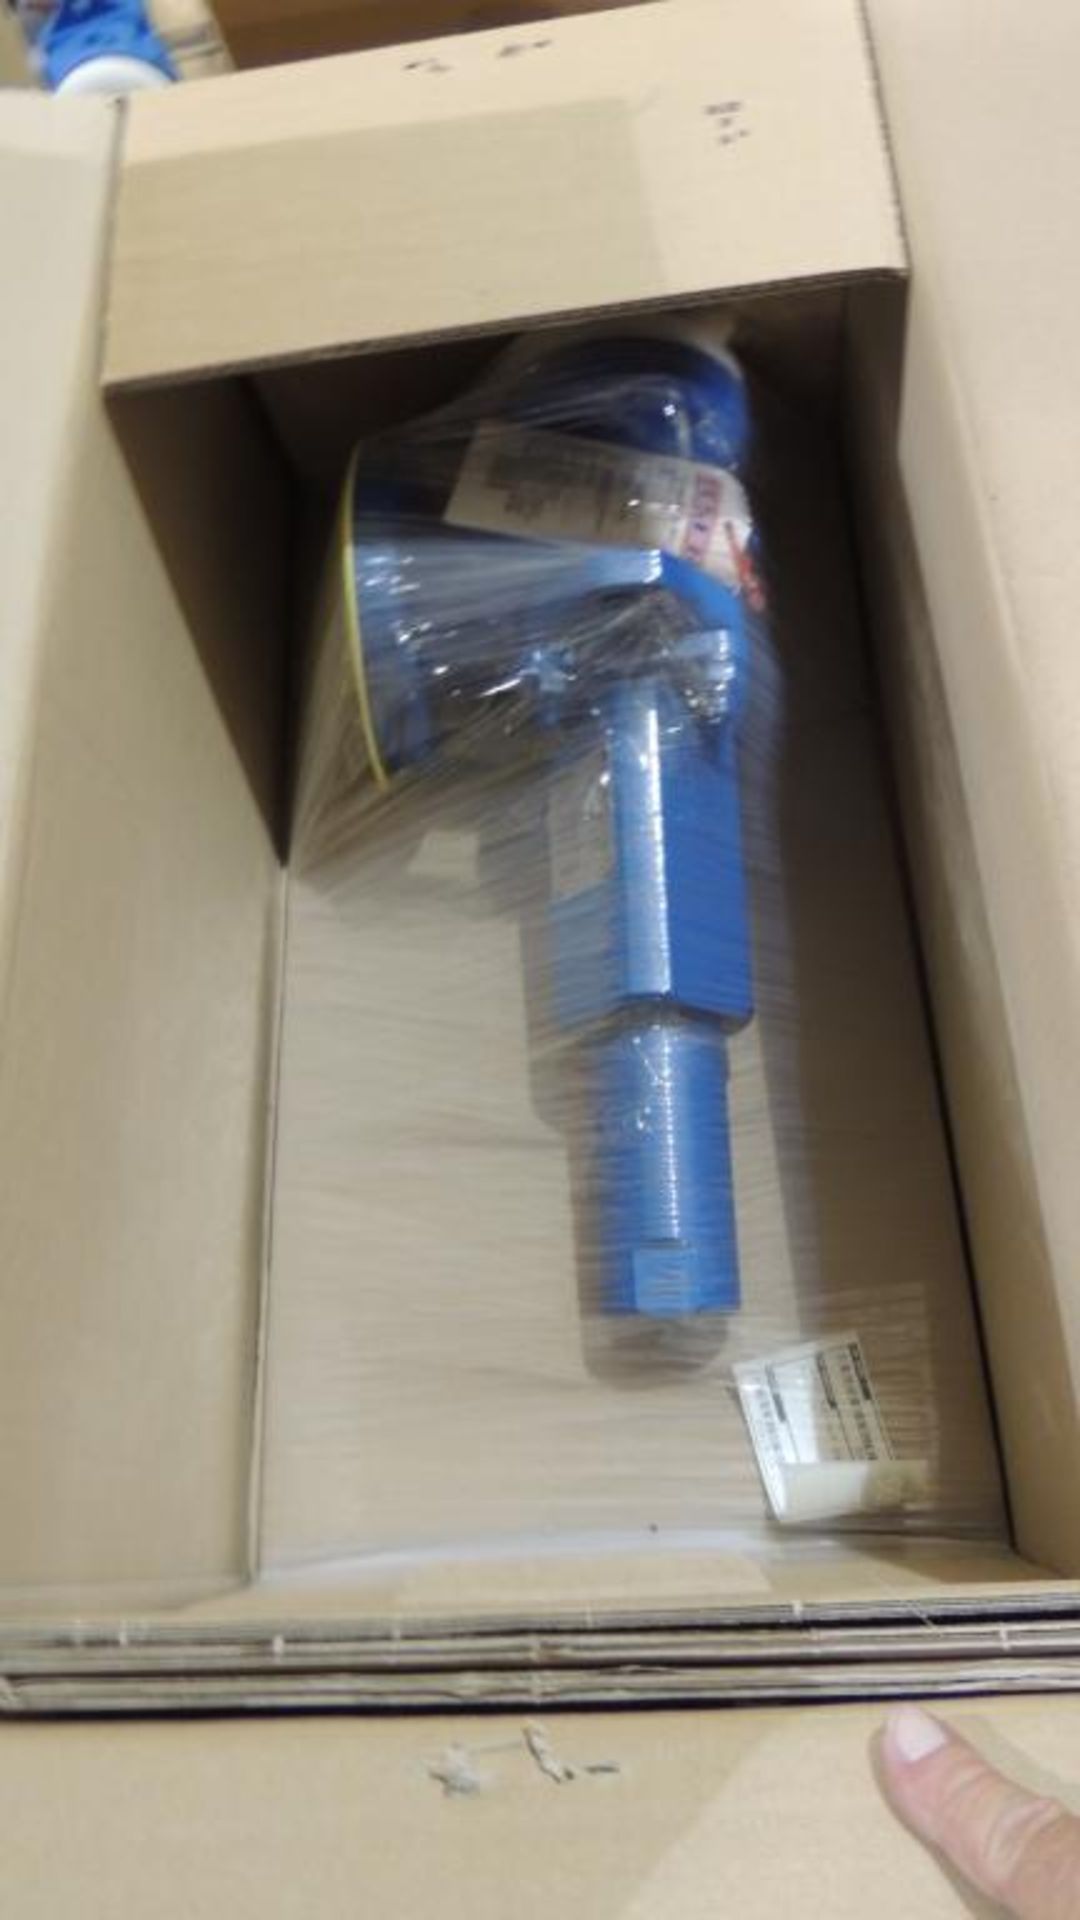 Large Quantity of Leser Relief and Safety Valves, plus Spare Parts Kits - Image 105 of 374